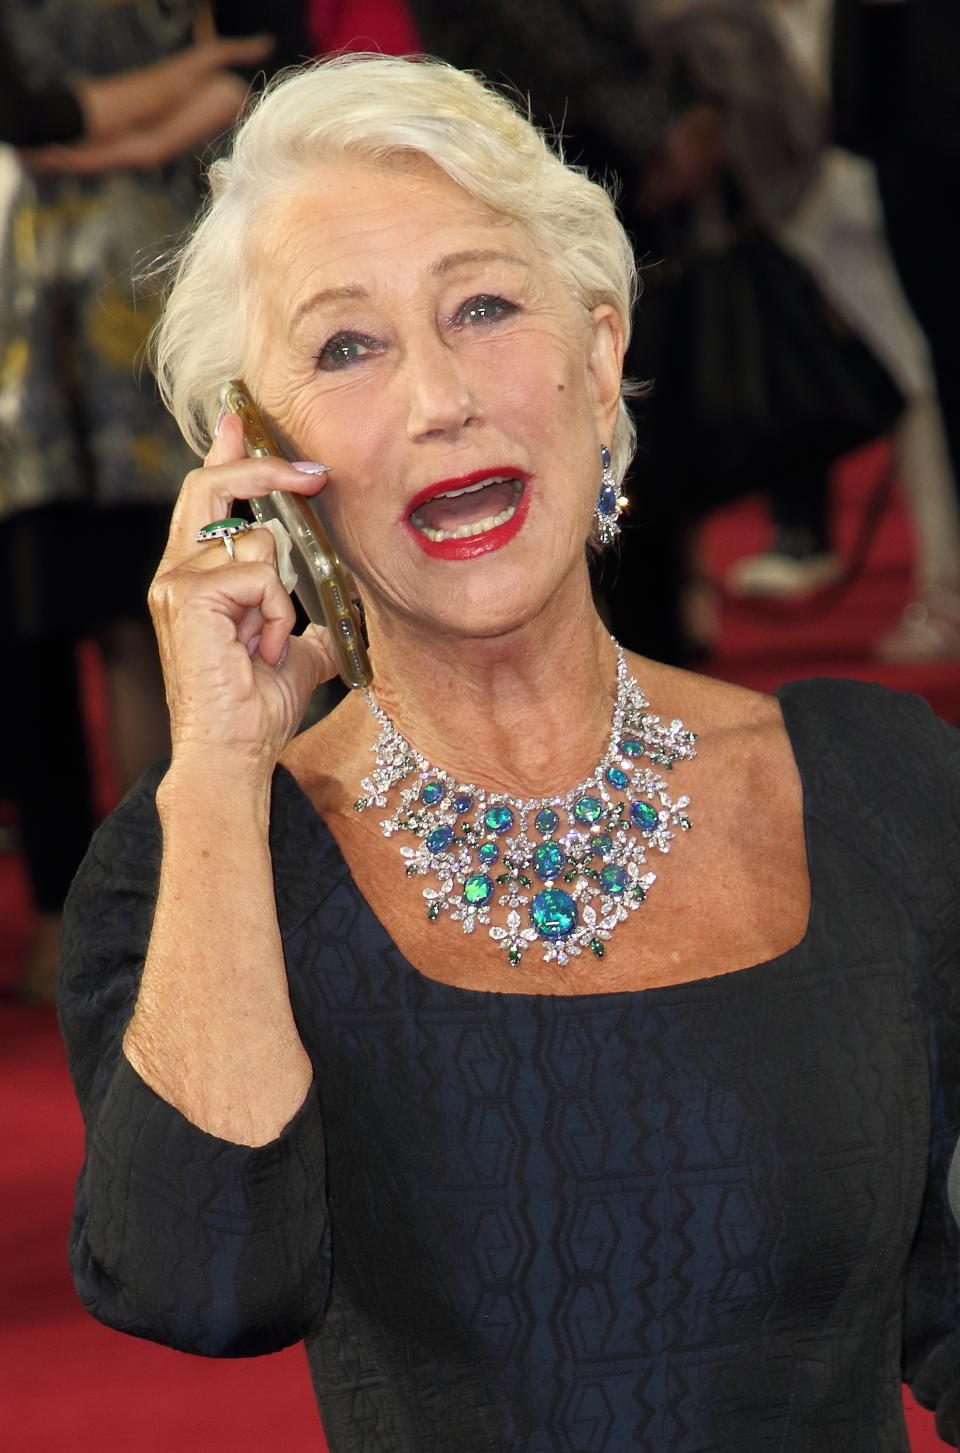 LONDON, UNITED KINGDOM - 2019/09/25: Dame Helen Mirren gets a call from her agent on the red carpet at the Sky Atlantic launch of their new TV series Catherine The Great at the Curzon Mayfair, London. (Photo by Keith Mayhew/SOPA Images/LightRocket via Getty Images)